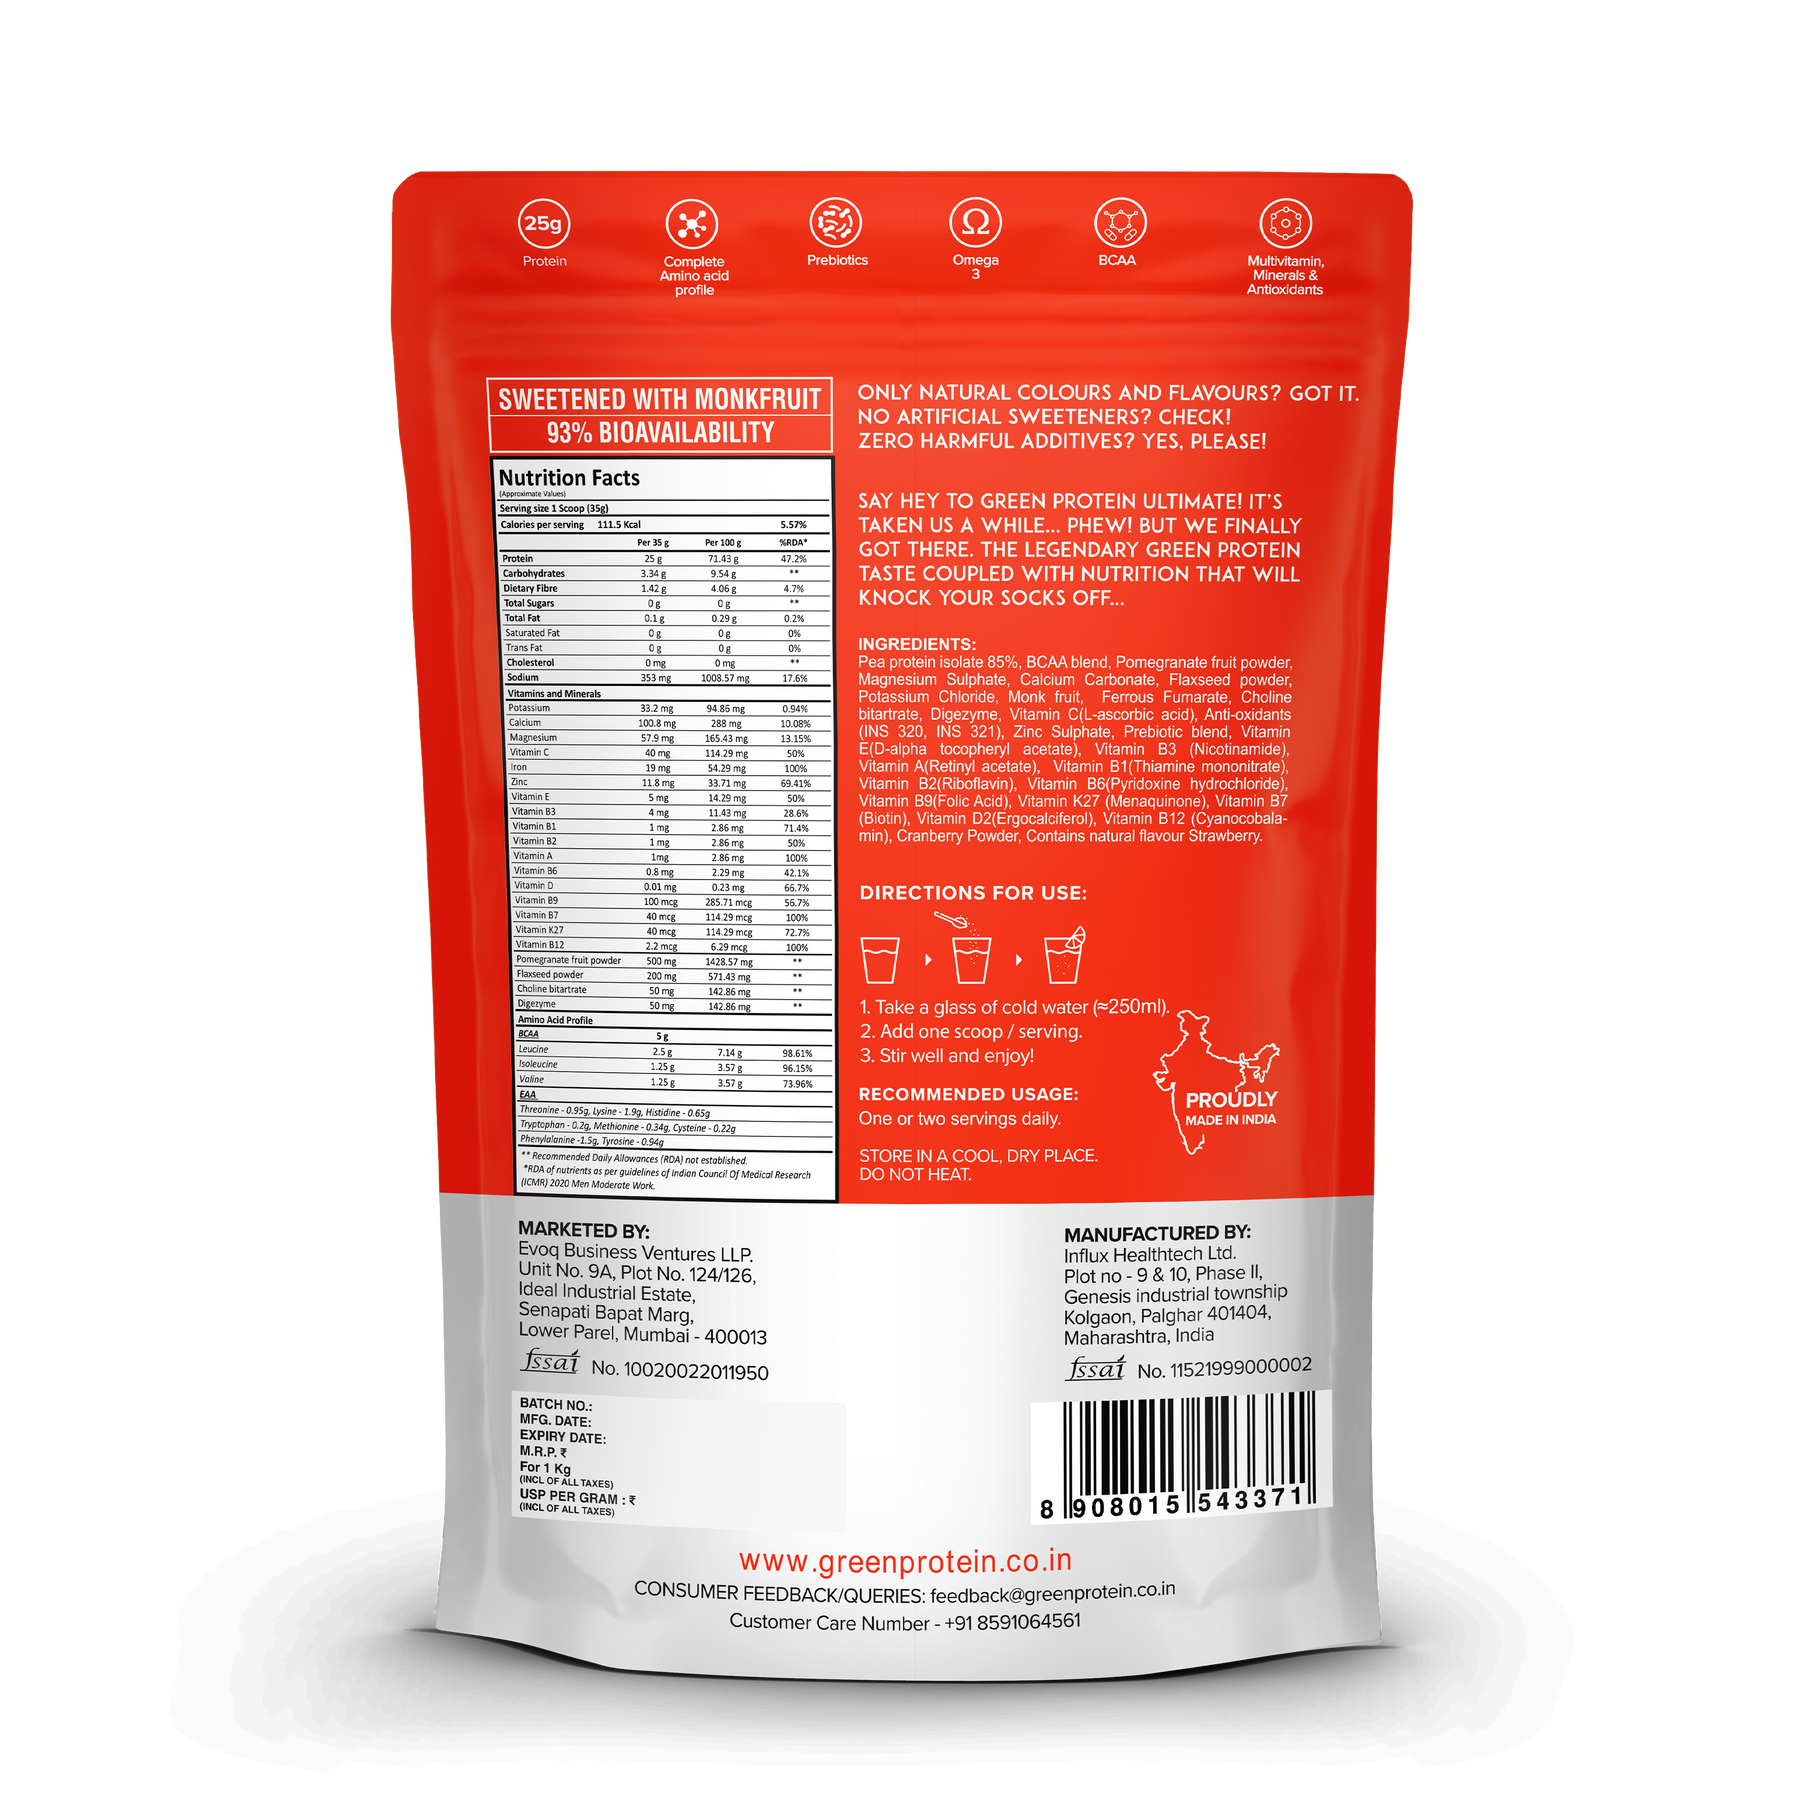 Ultimate Strawberry Pouch 1Kg